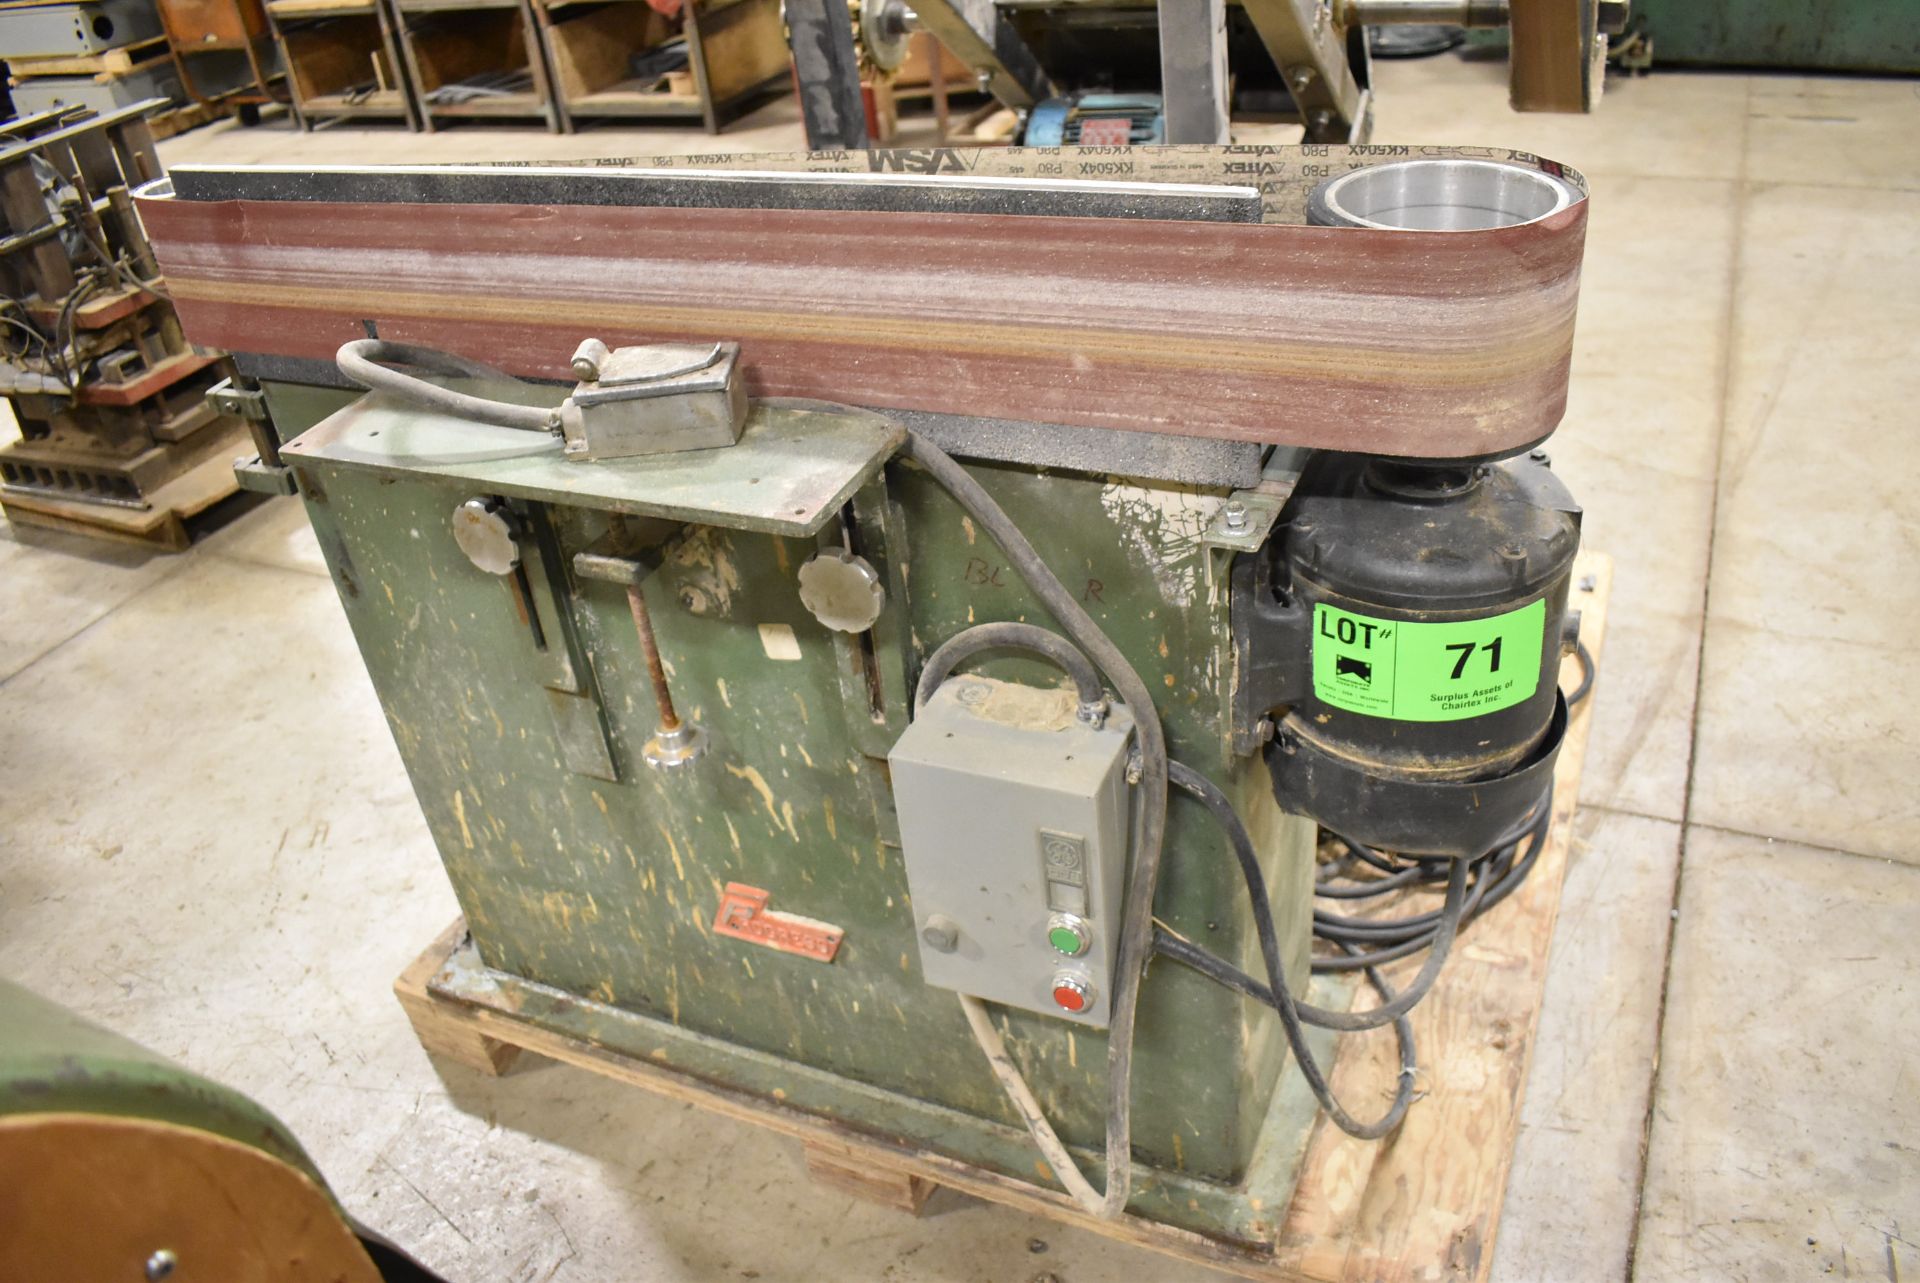 PROGRESS VERTICAL BELT SANDER, S/N: N/A [RIGGING FEE FOR LOT #71 - $60 CDN PLUS APPLICABLE TAXES] - Image 2 of 3